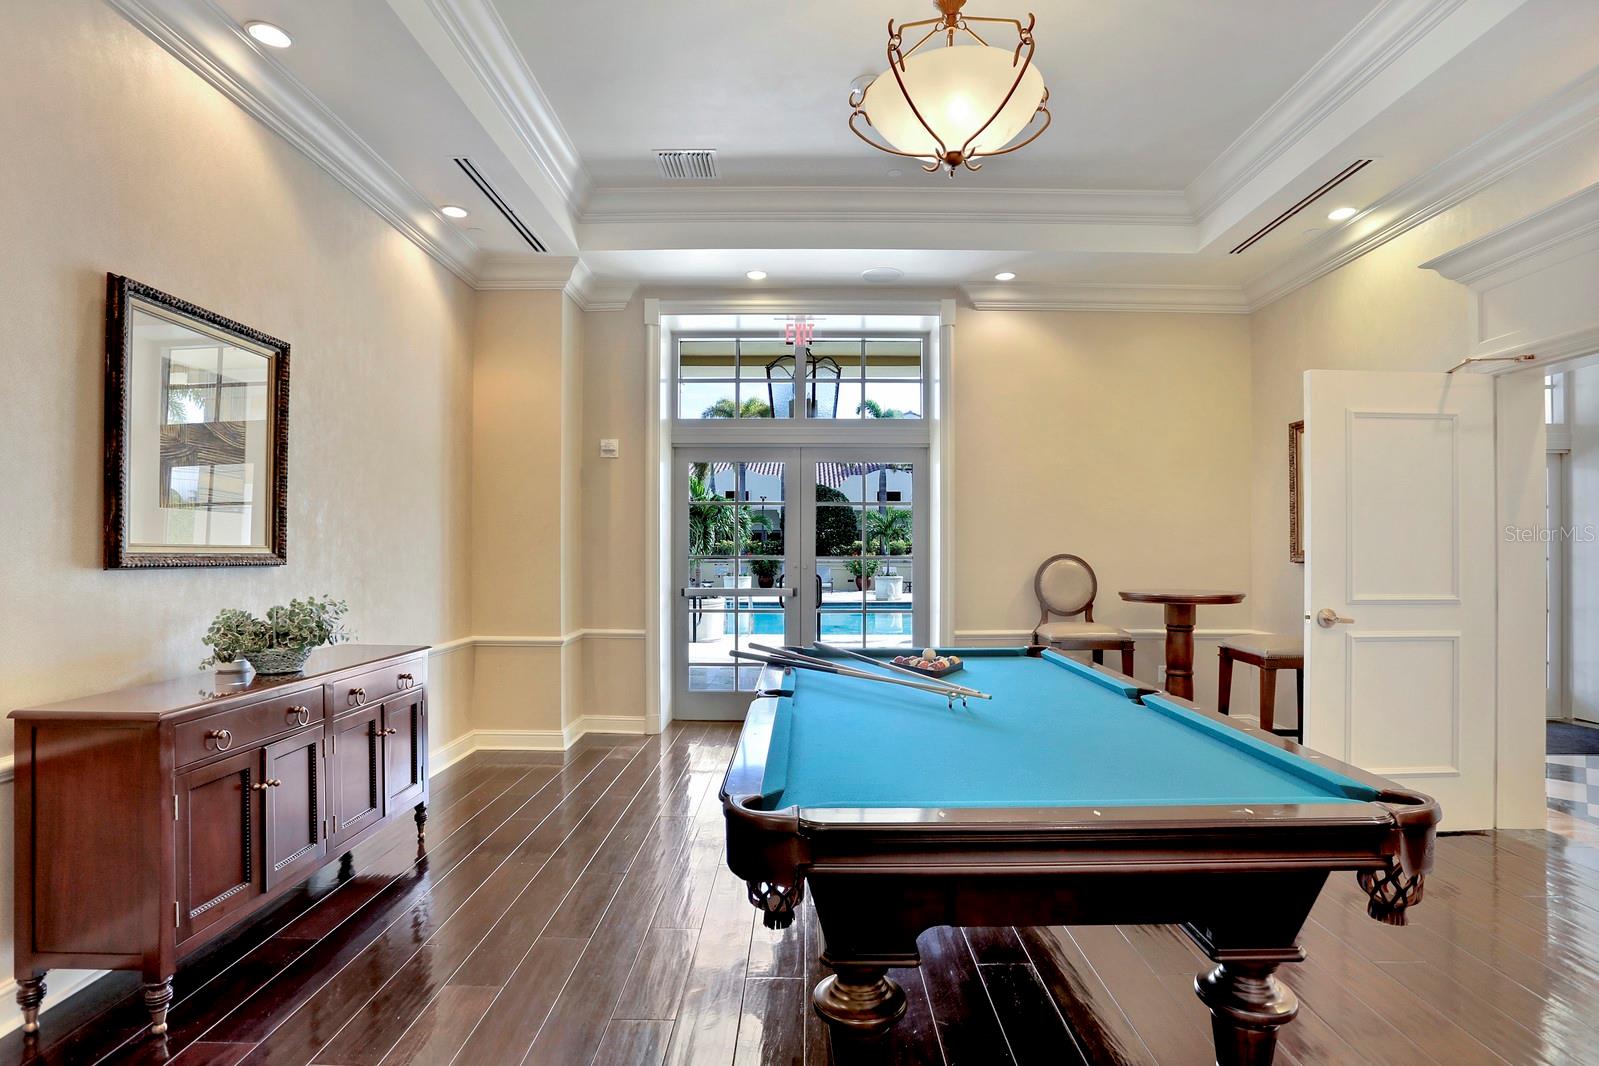 Have some fun playing pool in the Billiards Room.